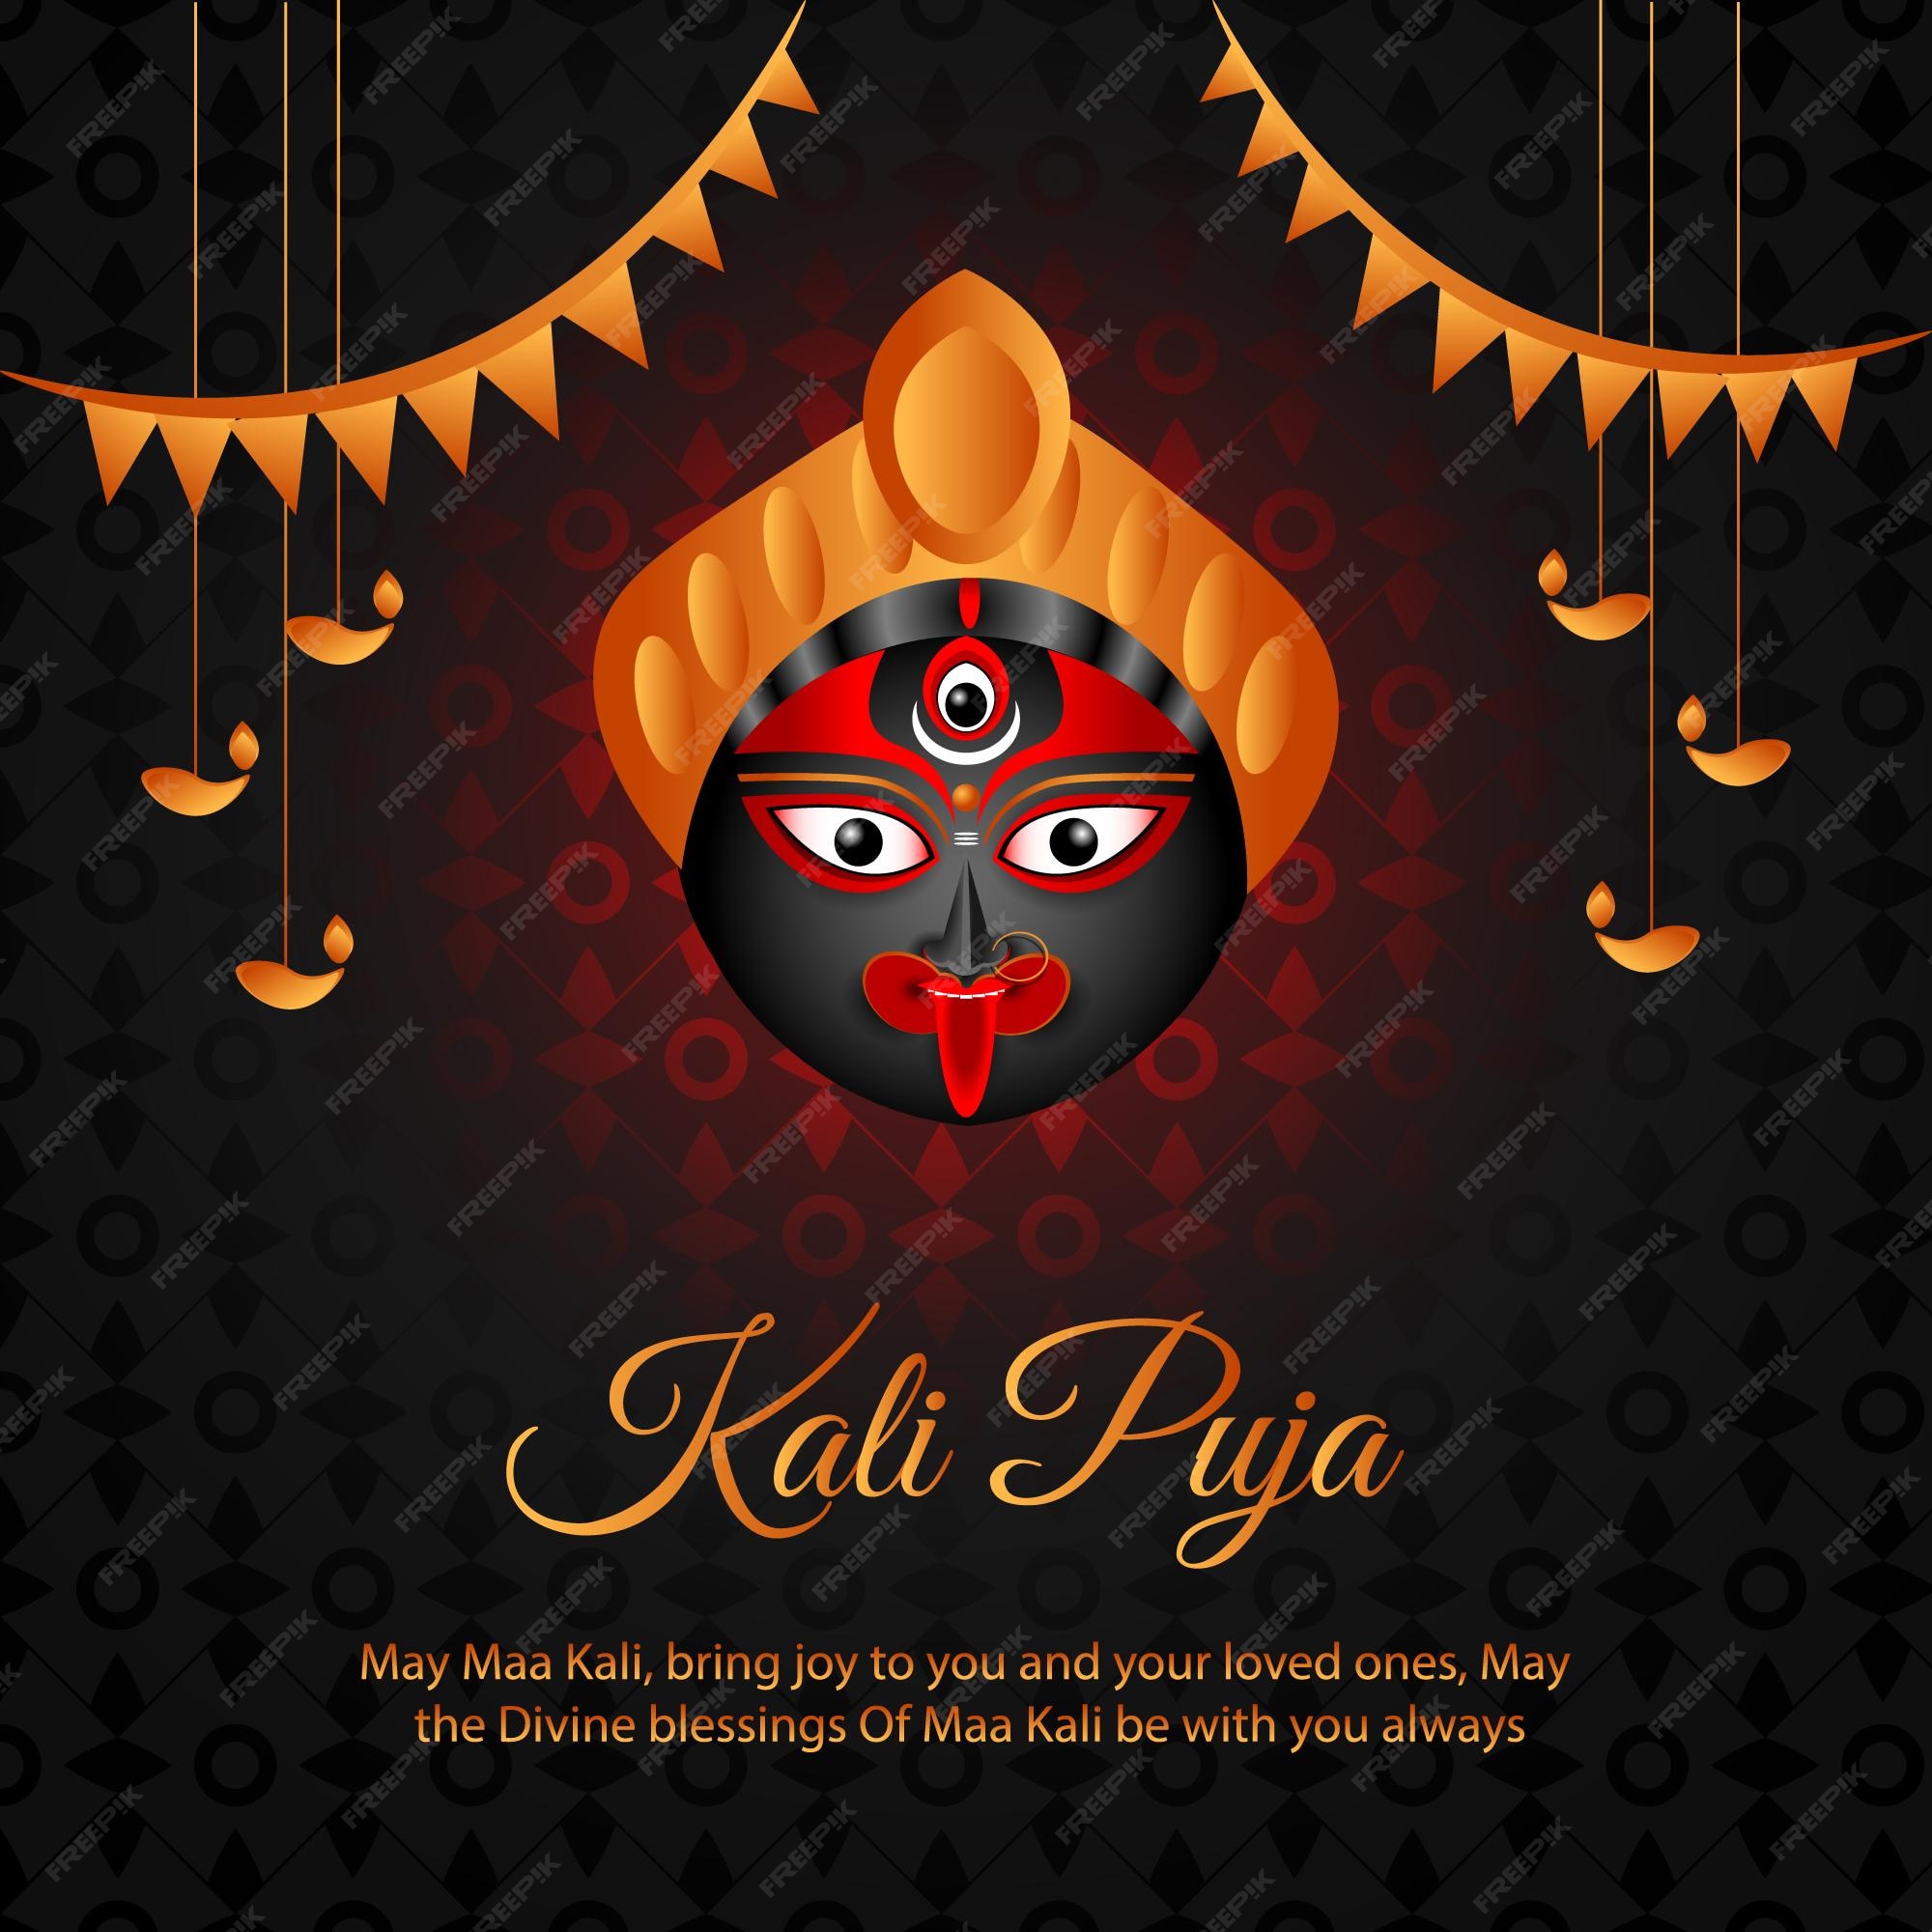 Premium Vector | Indian festival kali puja poster with abstract background